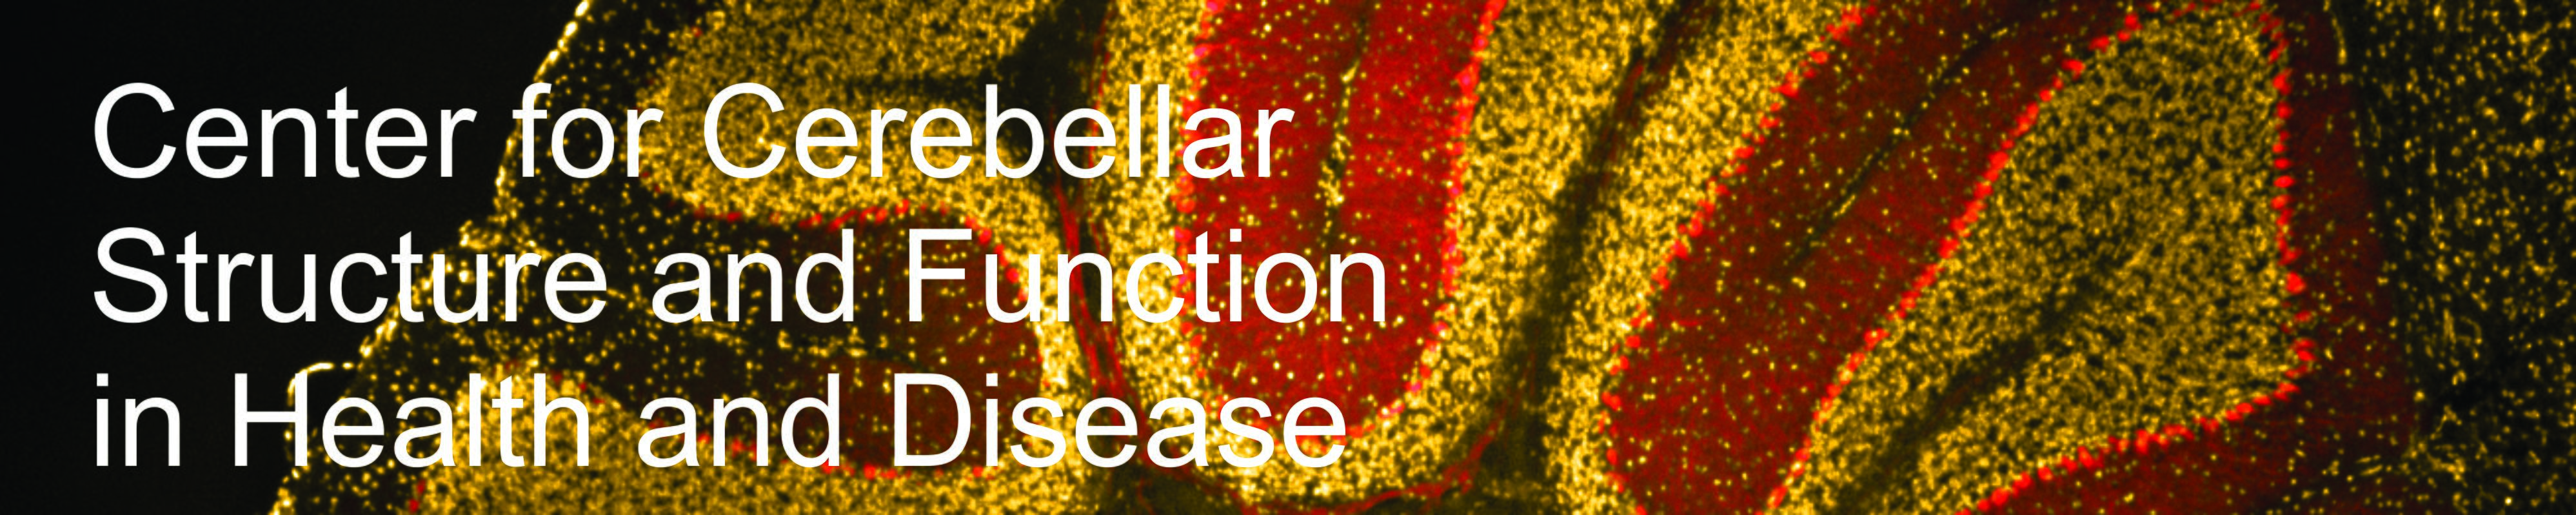 Center for Cerebellar Structure and Function in Health and Disease Banner Image